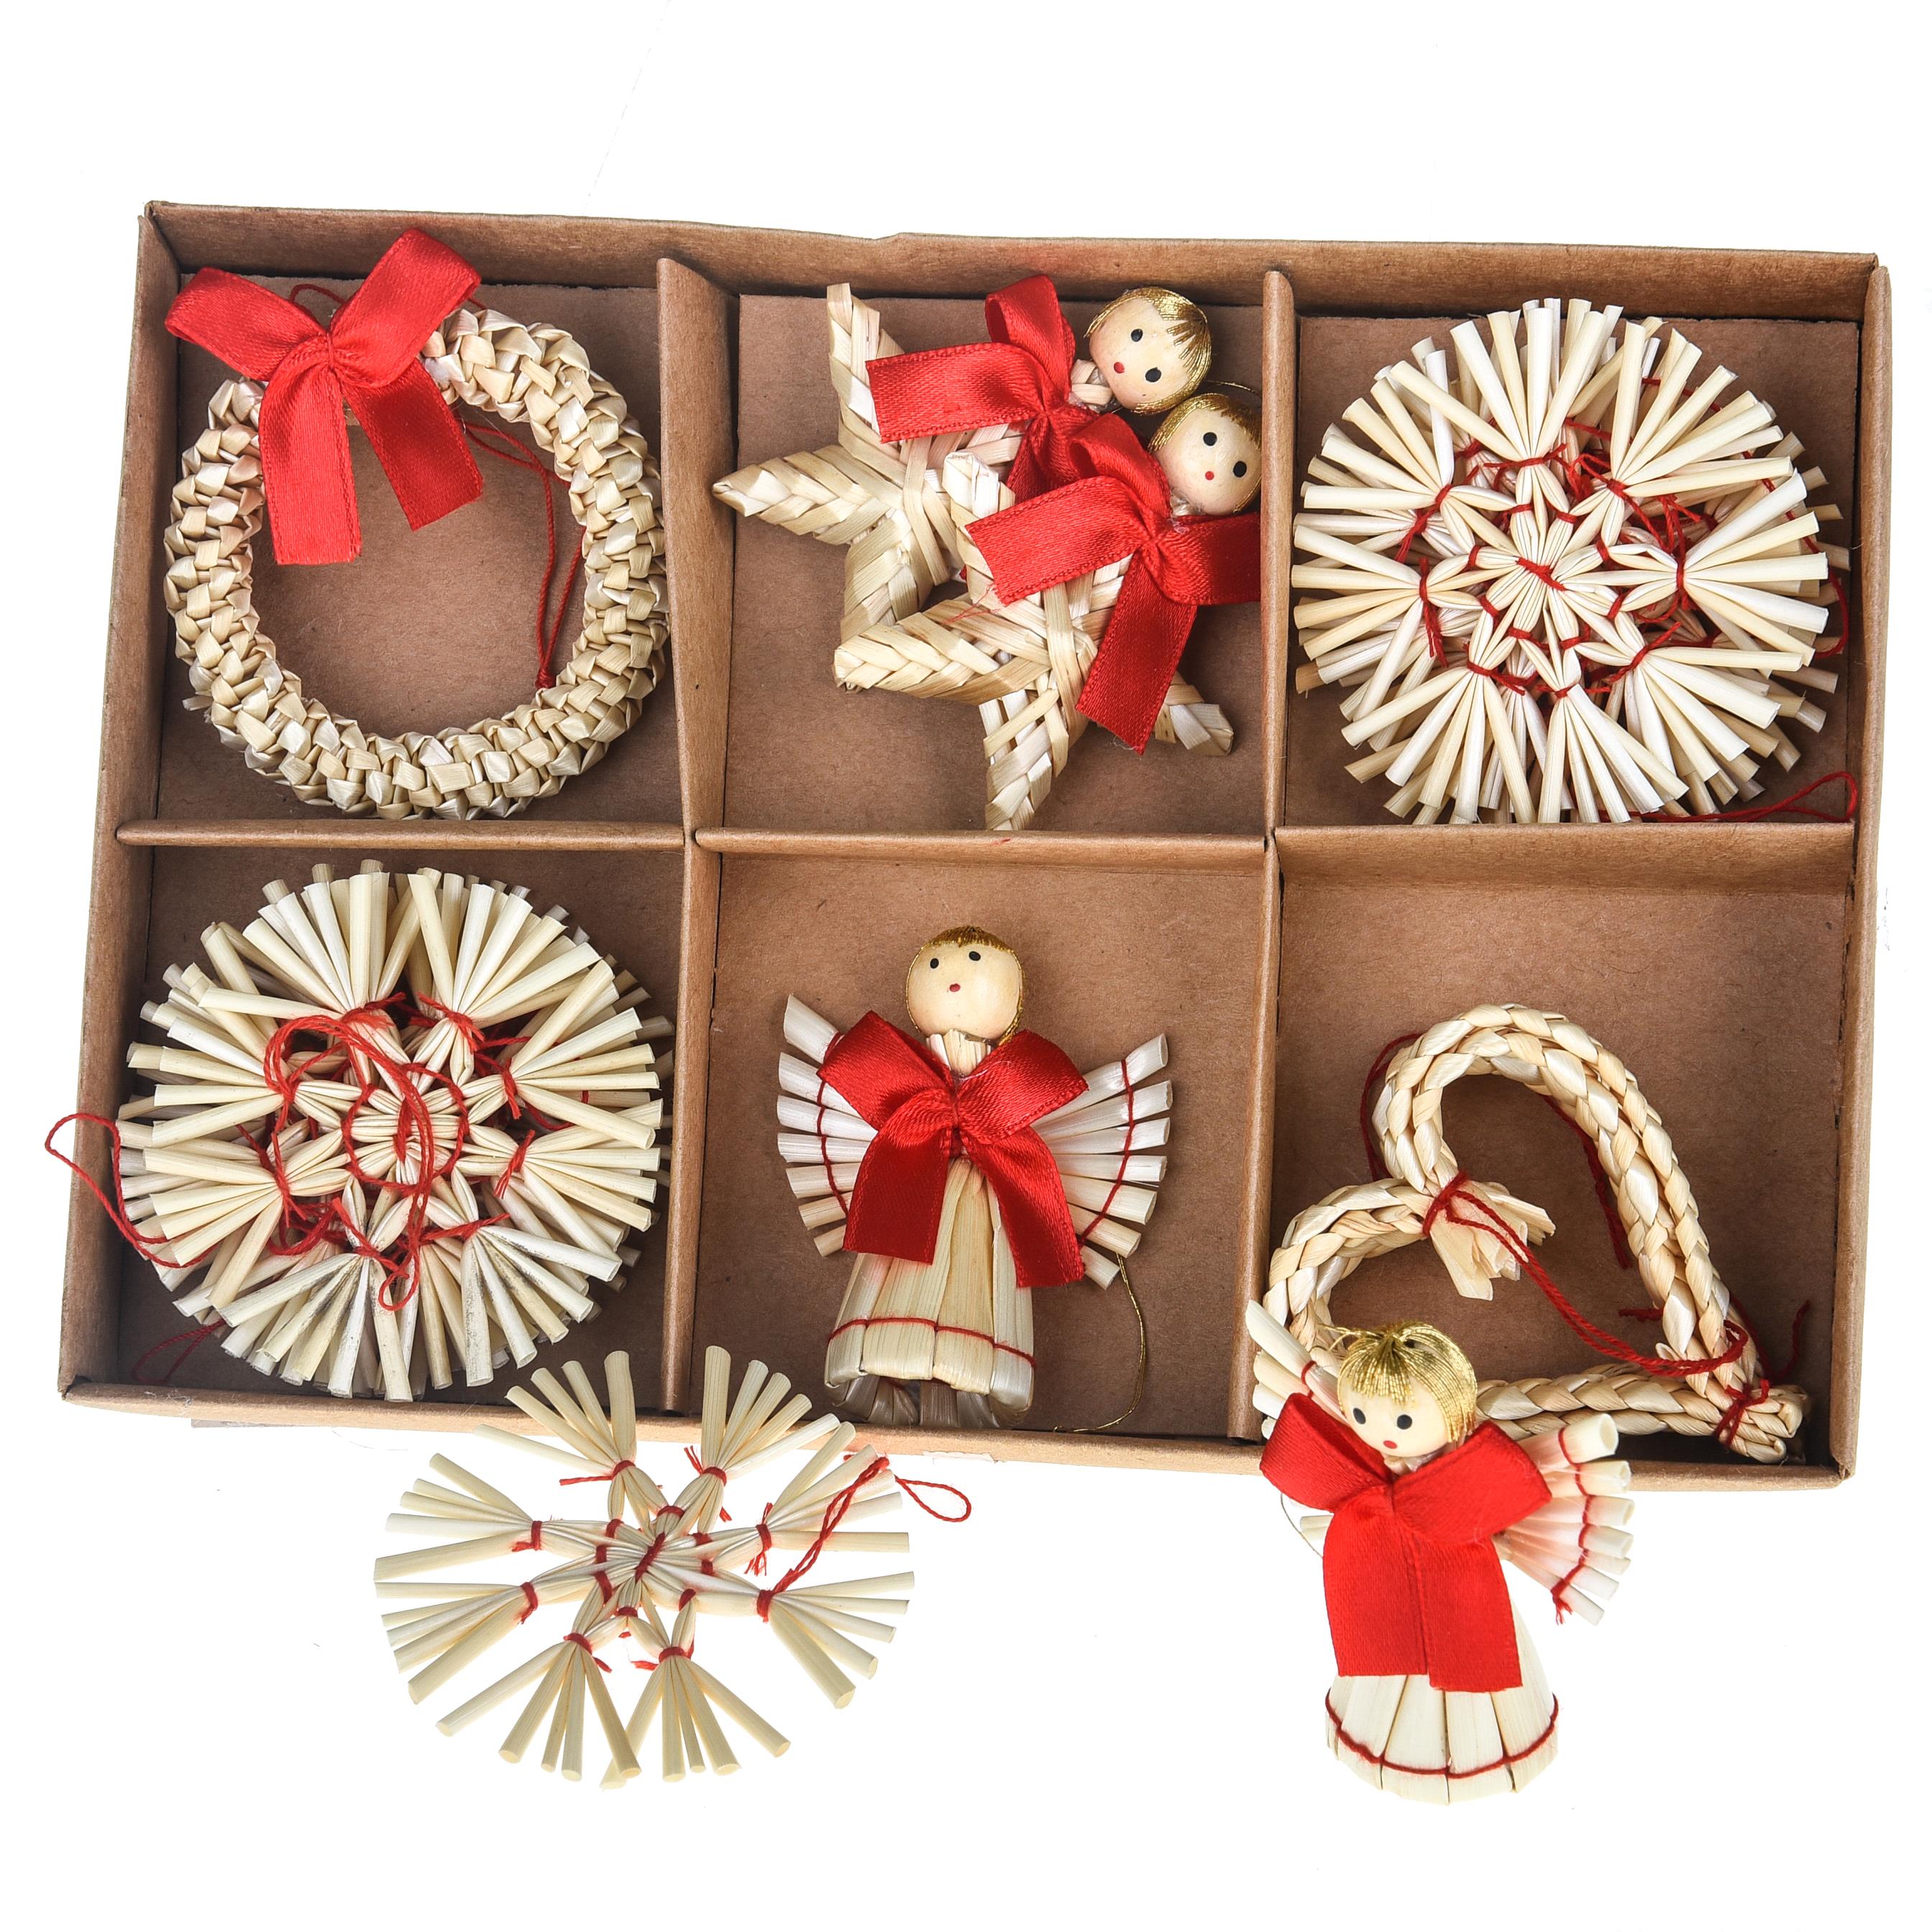 CHRISTMAS ITEMS, HANGING BALLS AND DECORATIONS IN WOOD, DECORI 18 PZ 5 CM C.A.IN PAGLIA ASS.